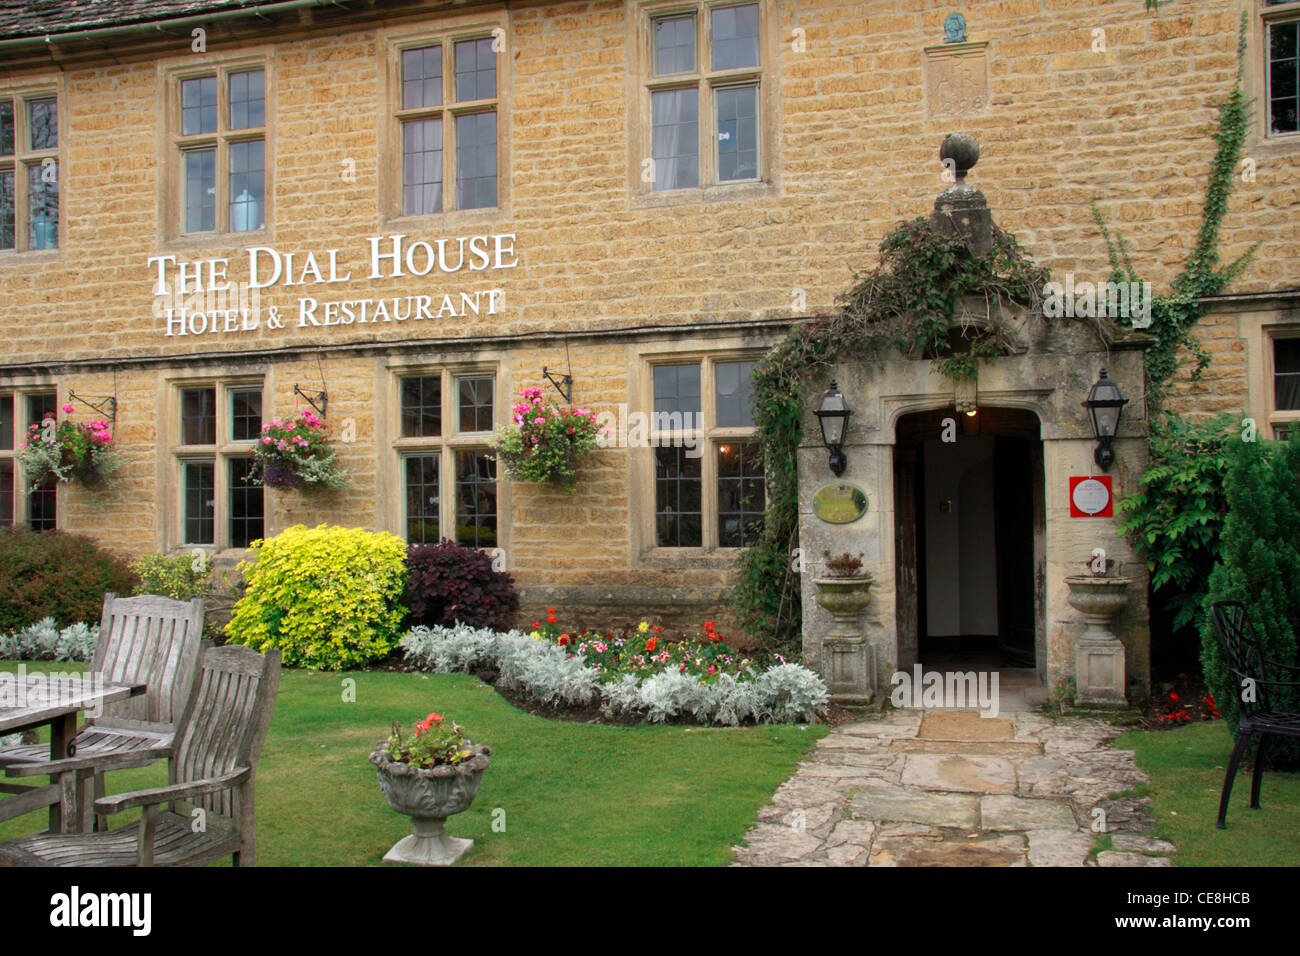 The Dial House Hotel and Restaurant, High Street, Bourton on the Water, in the Cotswolds. Stock Photo